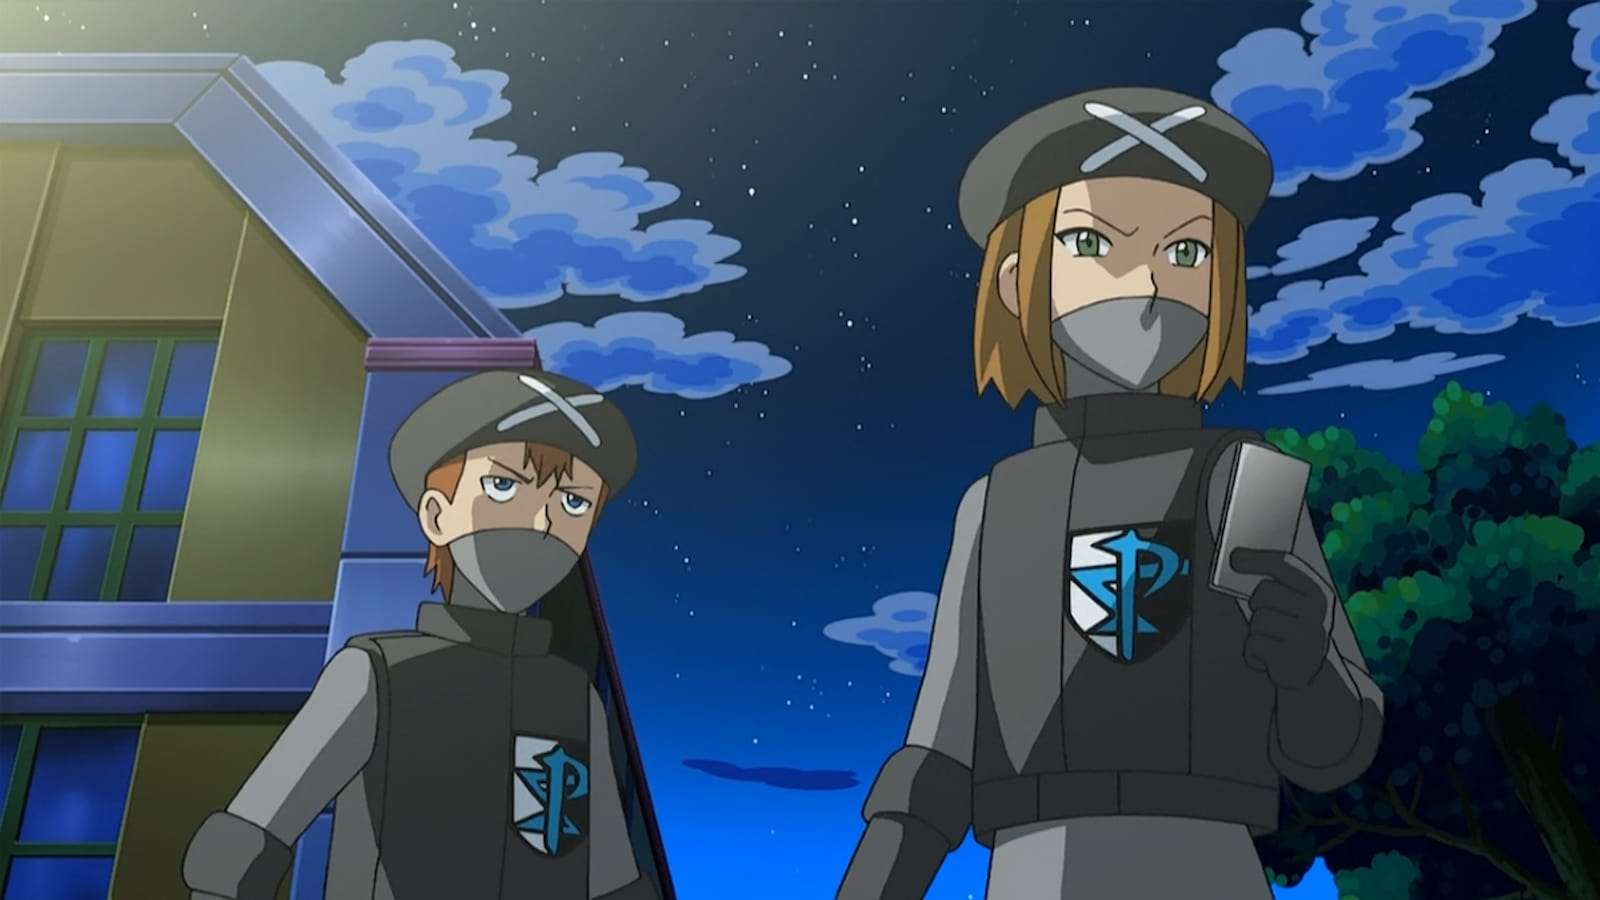 Schwarz and Weiss from Team Plasma in the Pokemon Anime